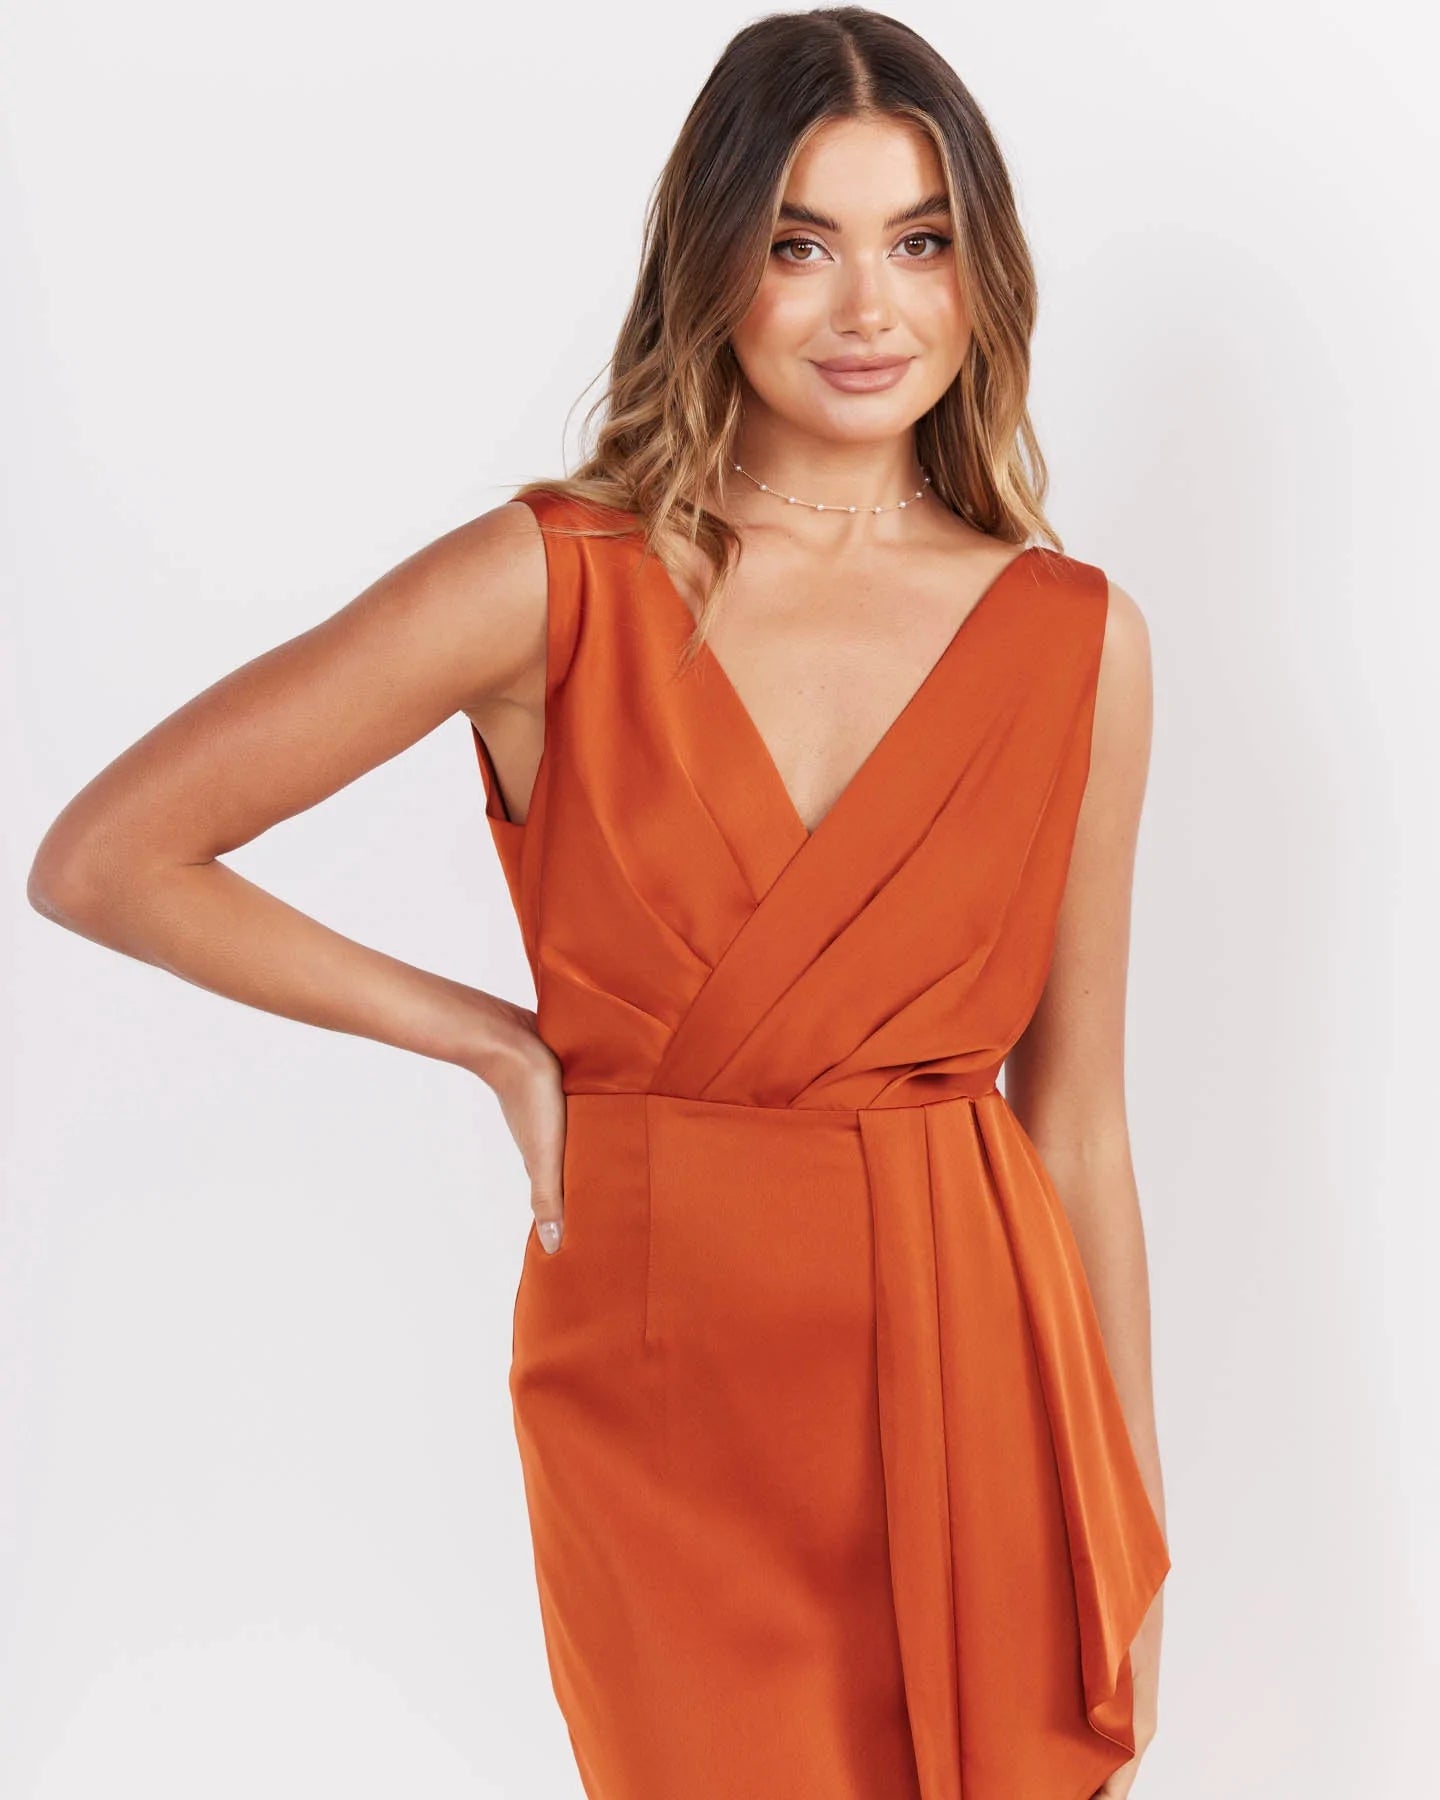 Two Sisters the Label Goddess Dress - Rust